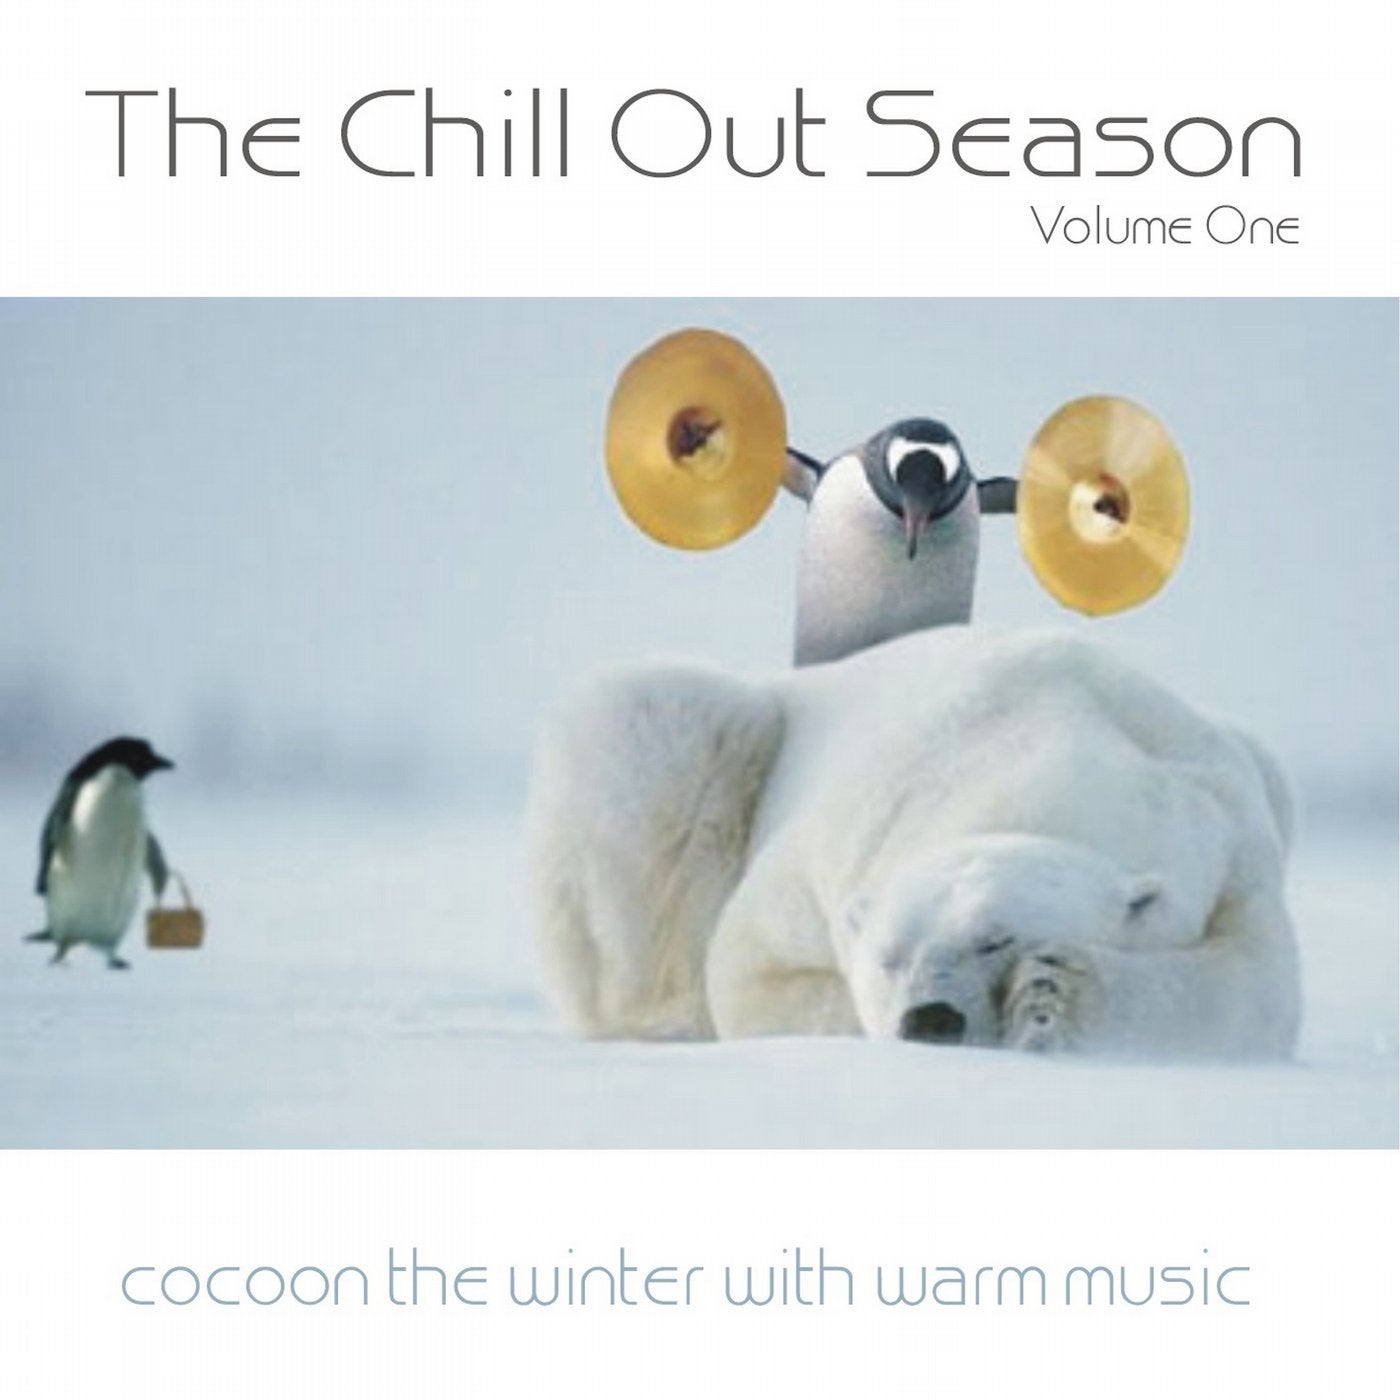 The Chill out Season Vol. 1